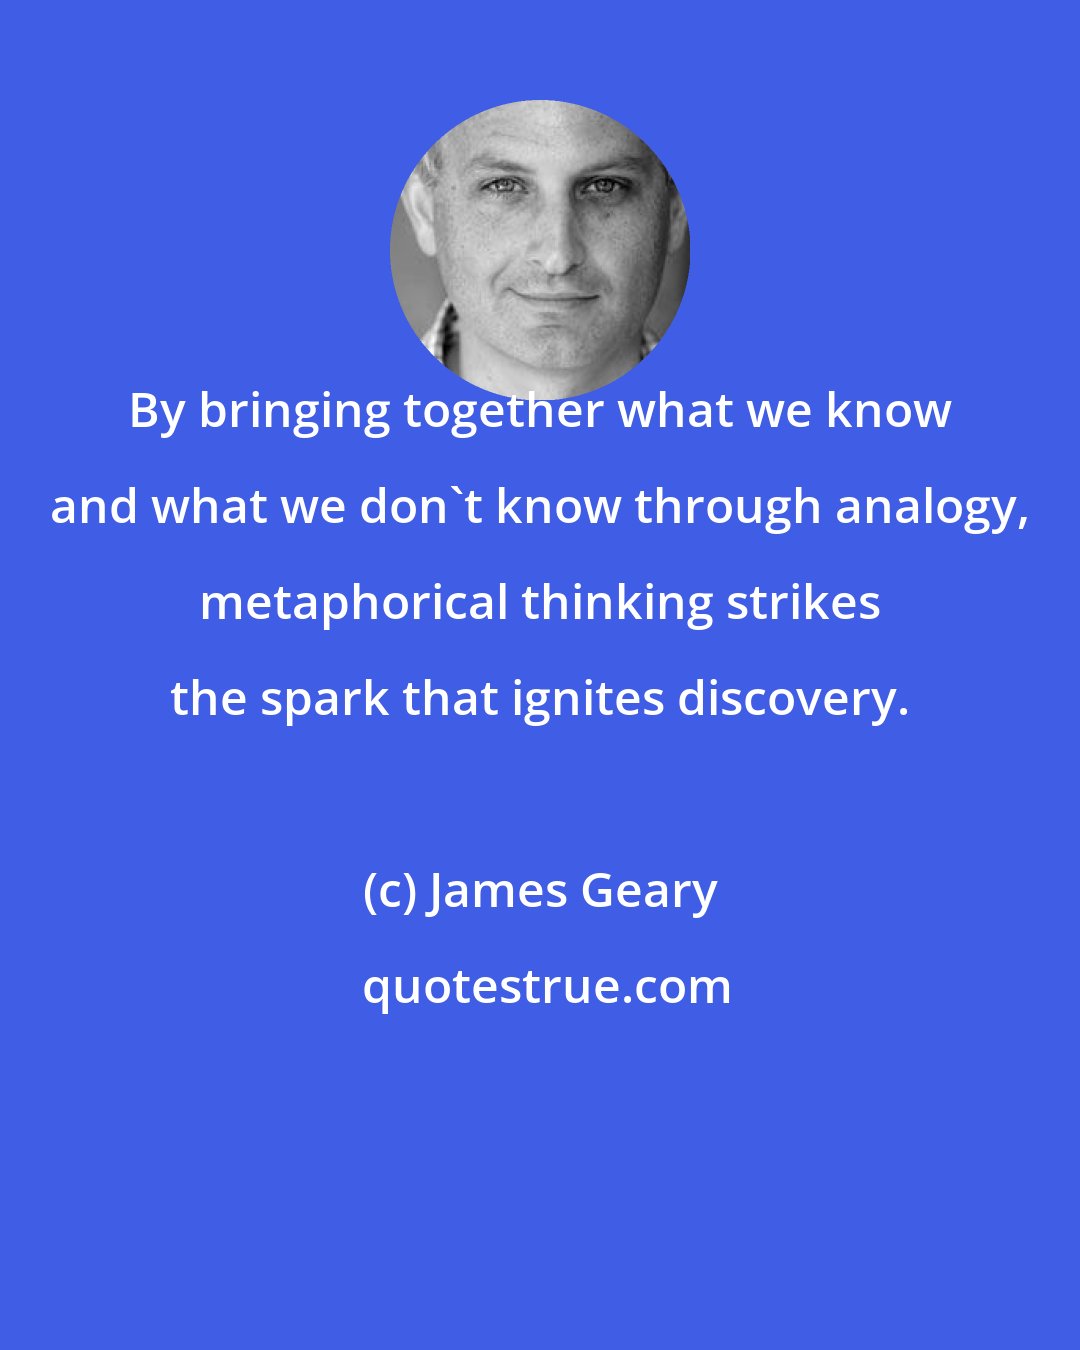 James Geary: By bringing together what we know and what we don't know through analogy, metaphorical thinking strikes the spark that ignites discovery.